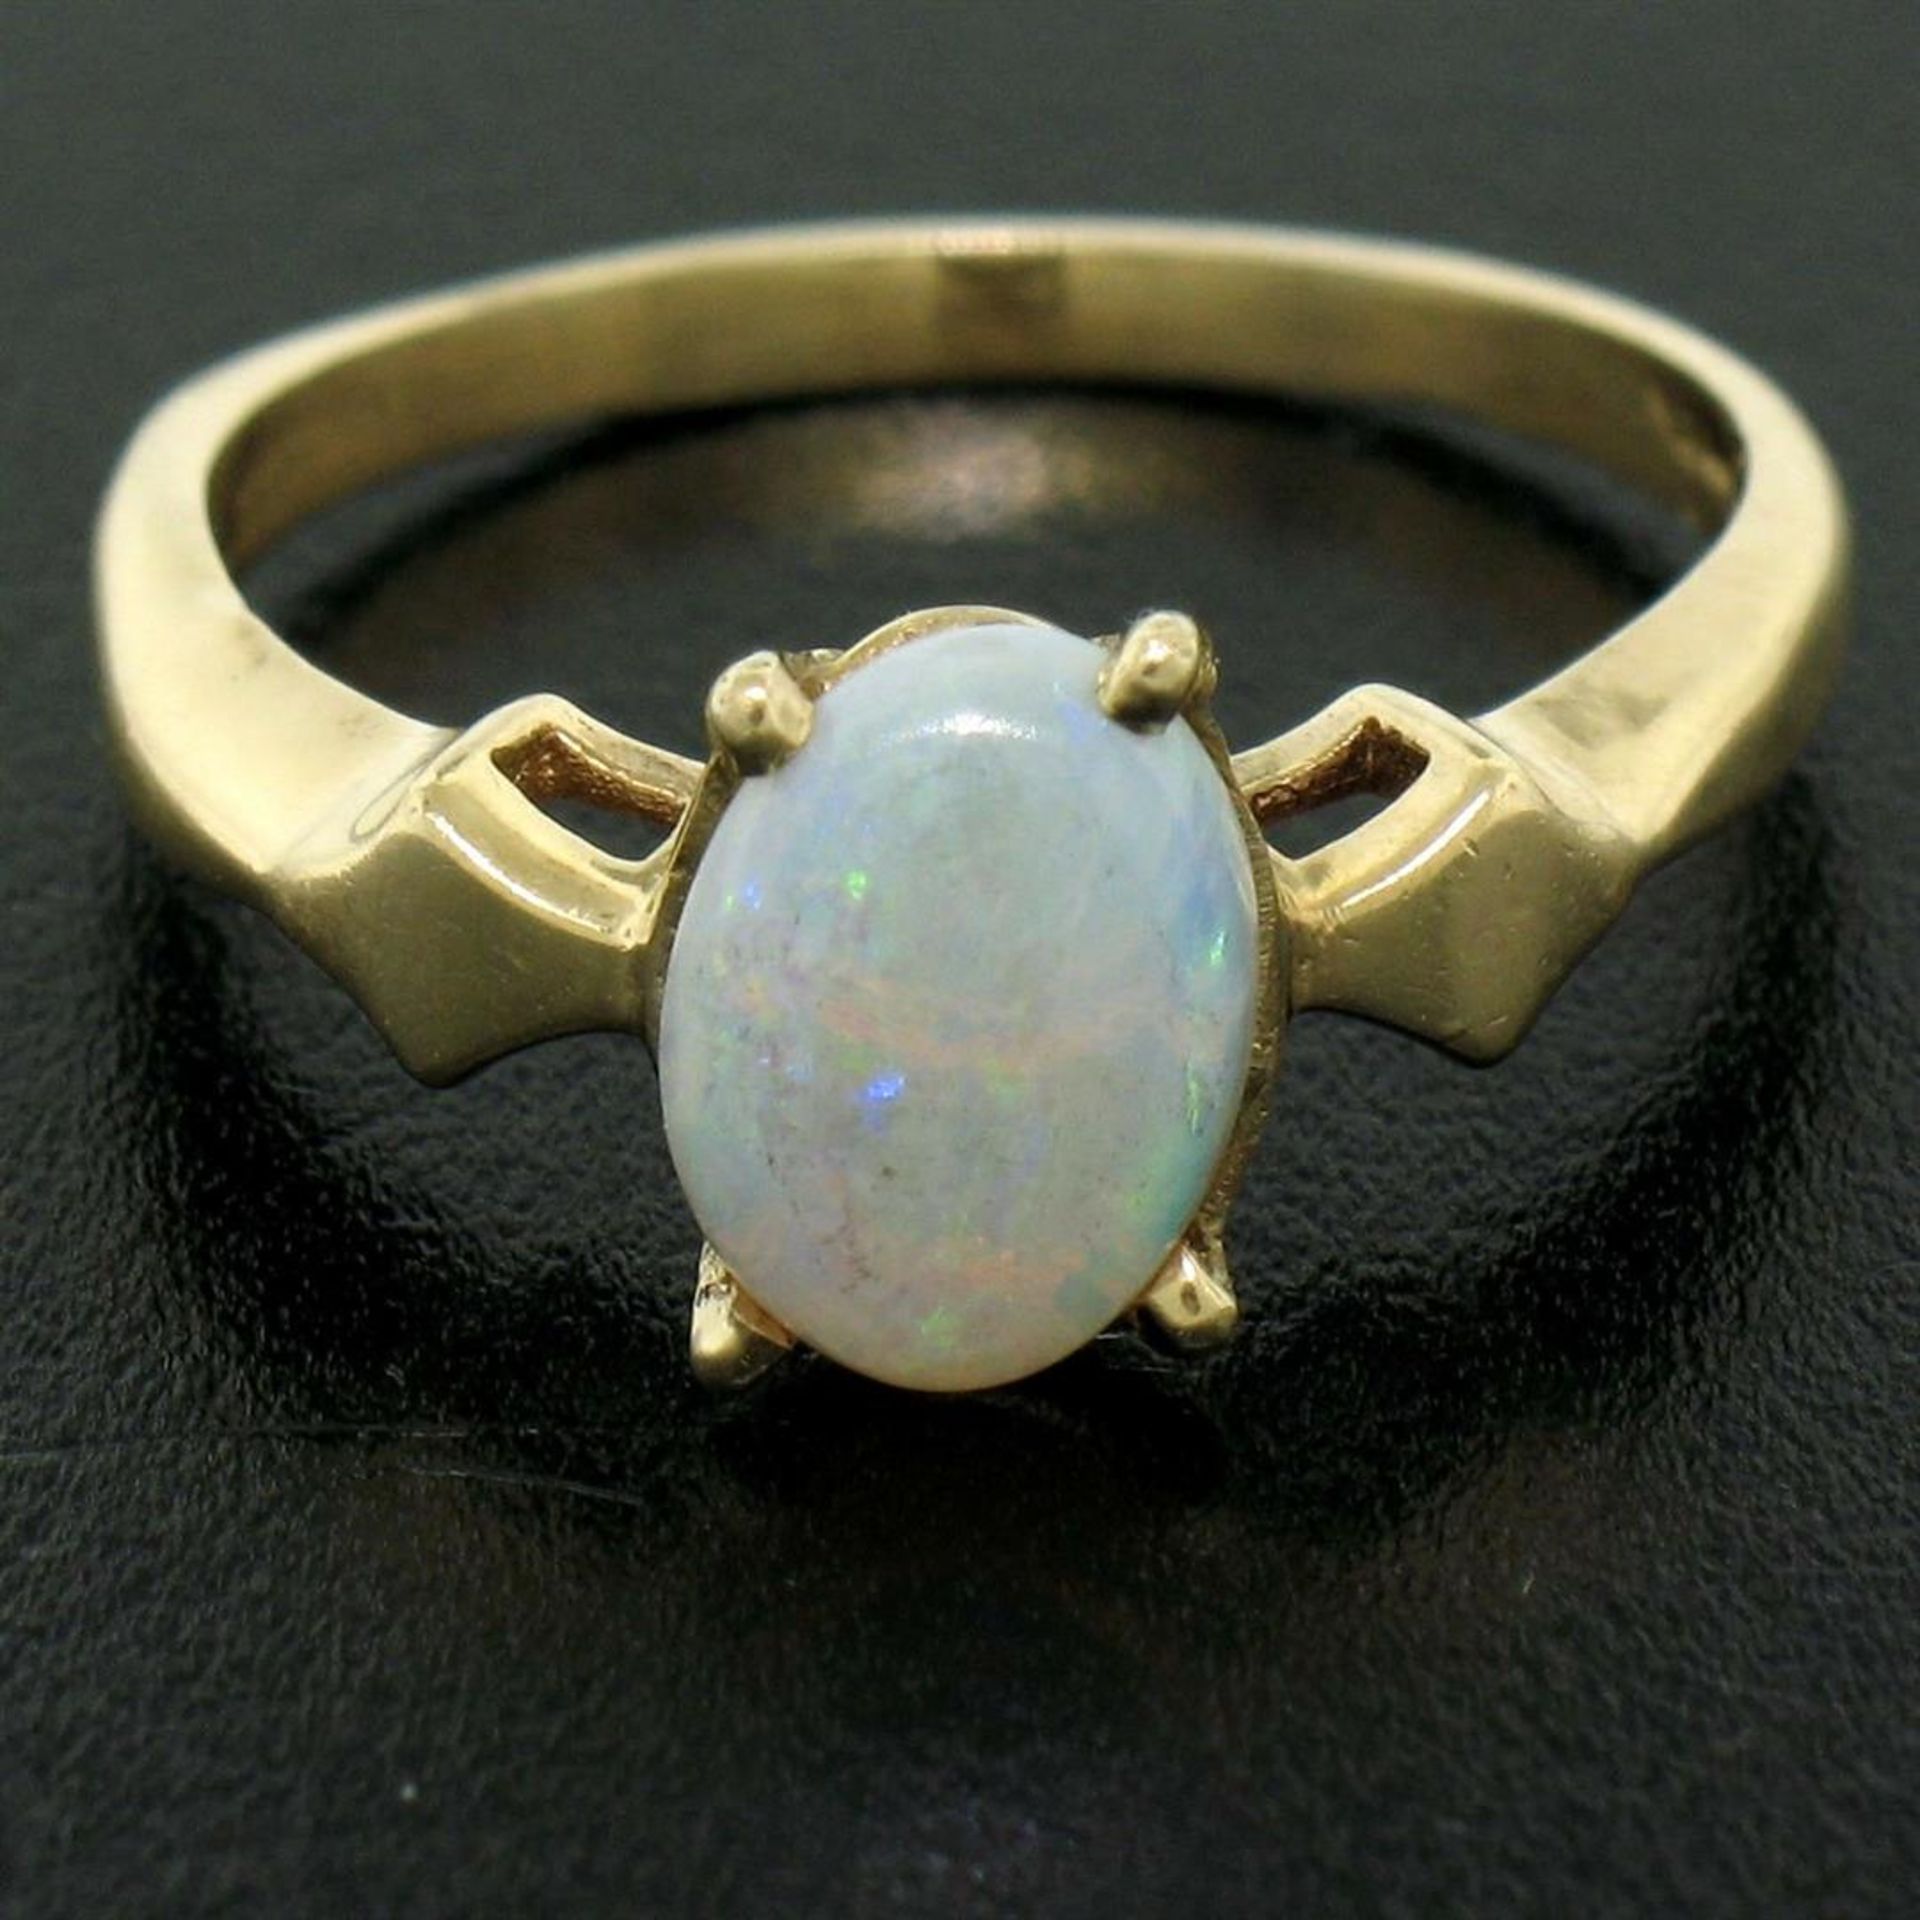 Vintage 14K Yellow Gold 0.65ct Petite Oval Cabochon Opal Solitaire Ring Size 6 - Image 8 of 9